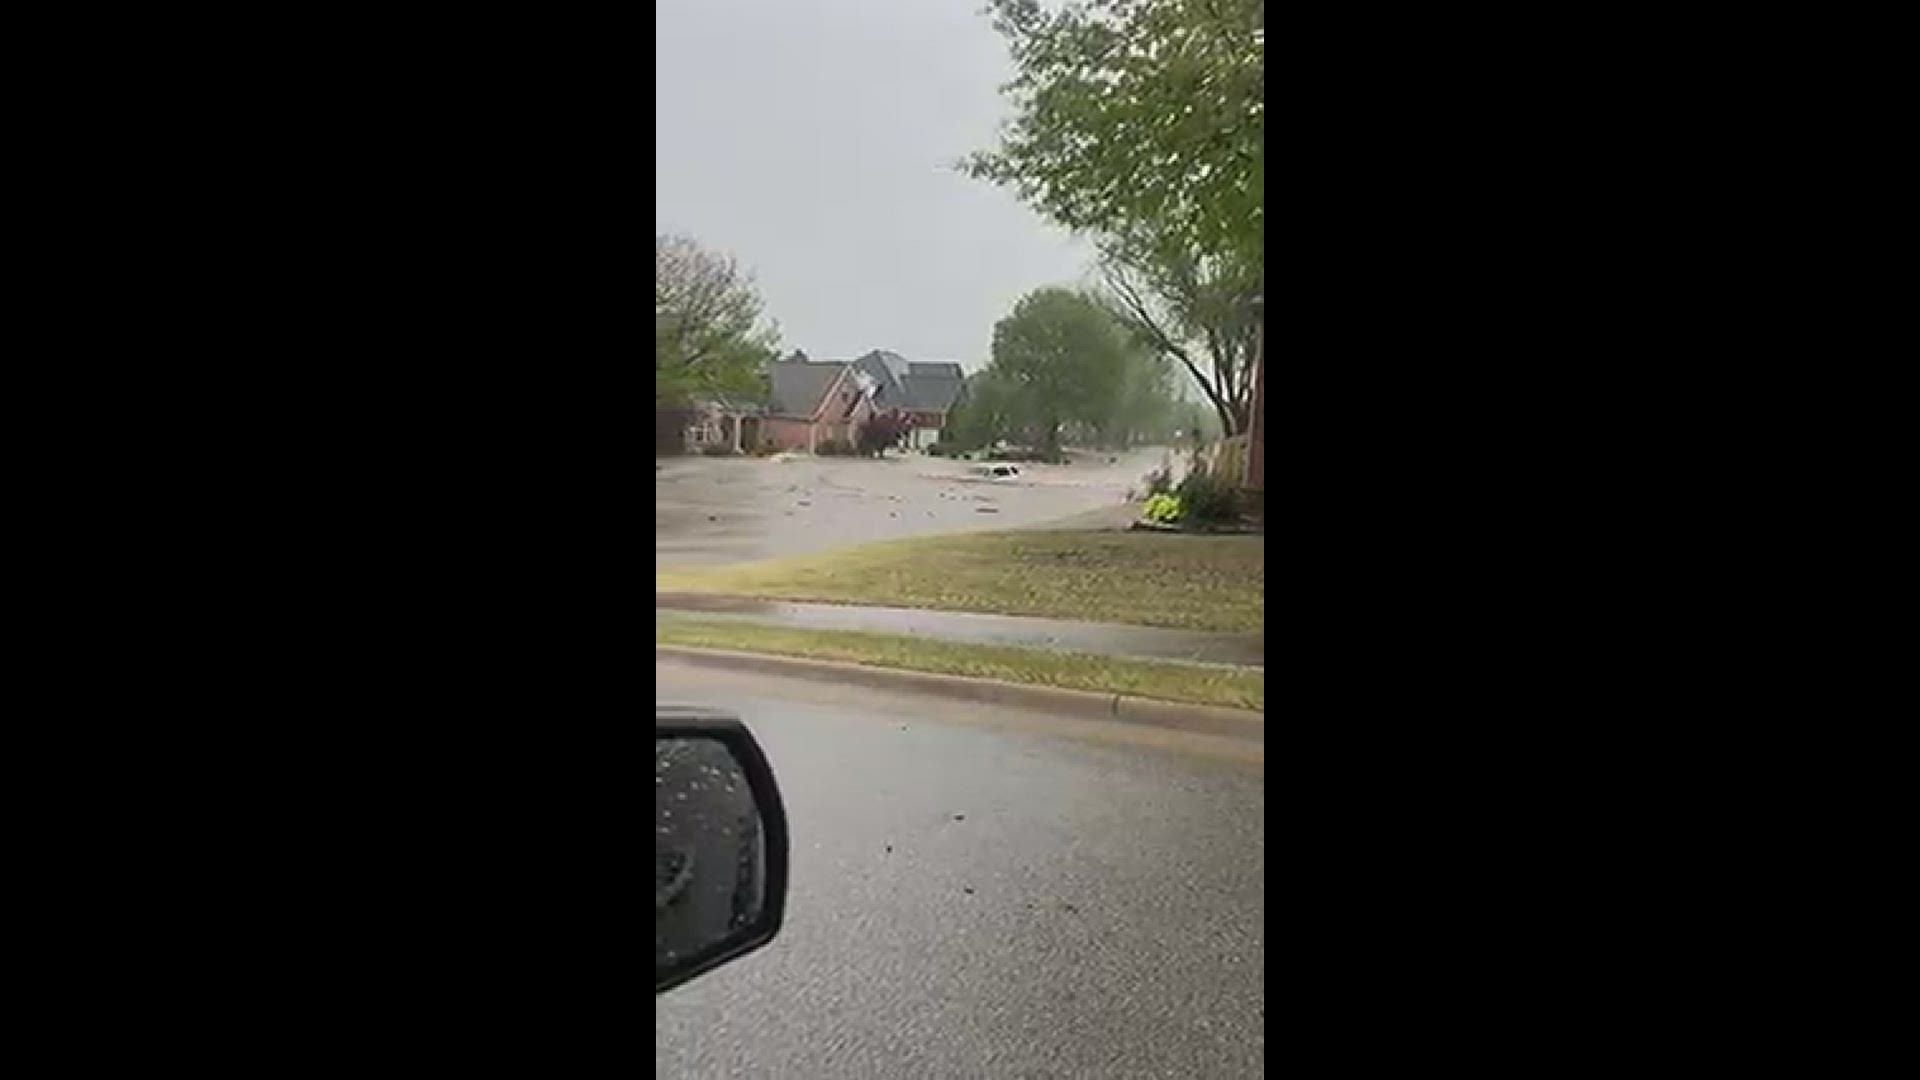 Video shows a car dangerously drive through a flooded Rogers neighborhood.